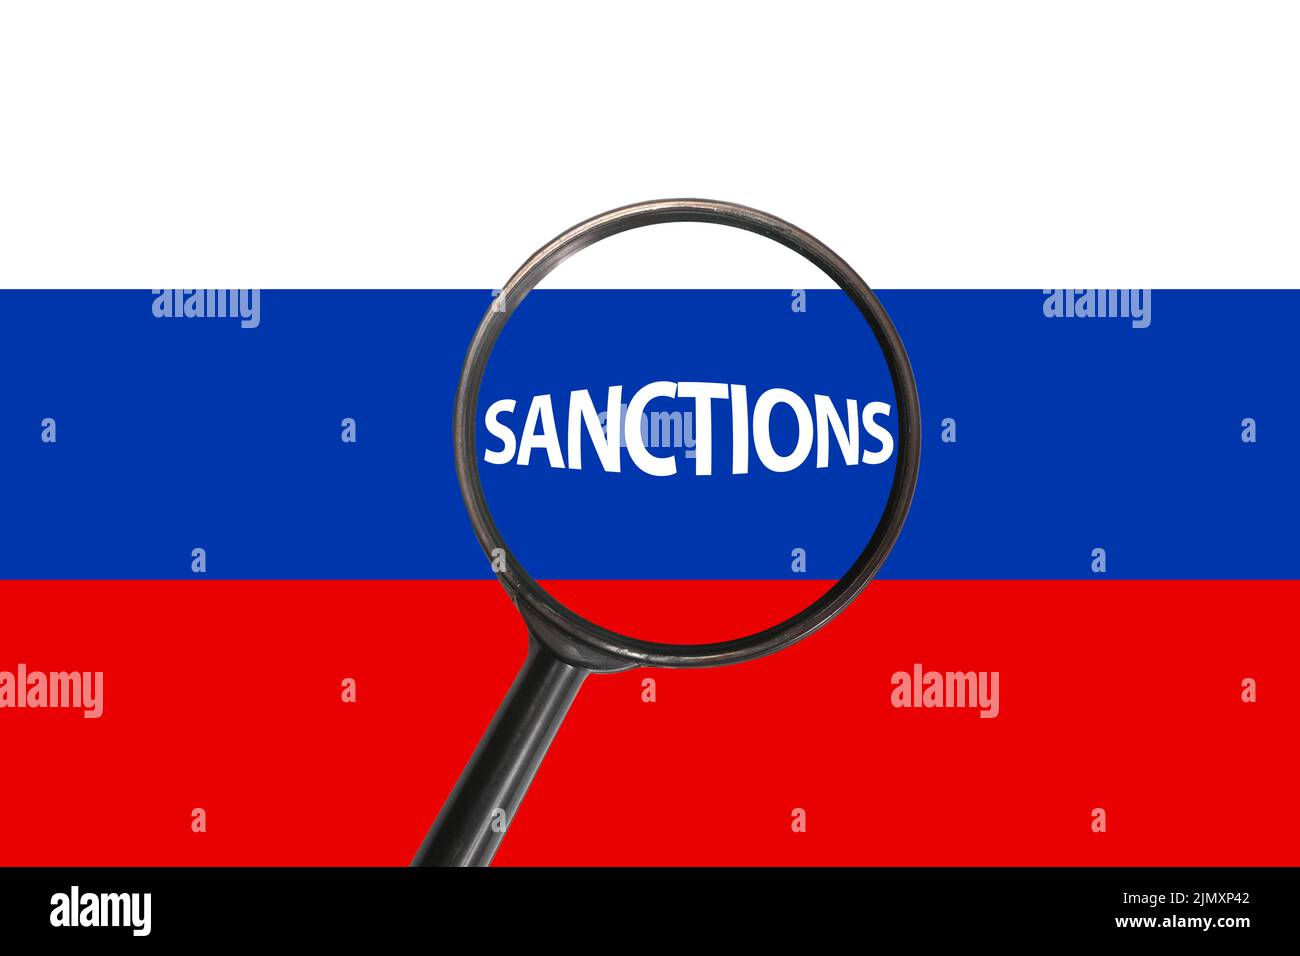 Sanctions against Russia with magnifier glass Stock Photo